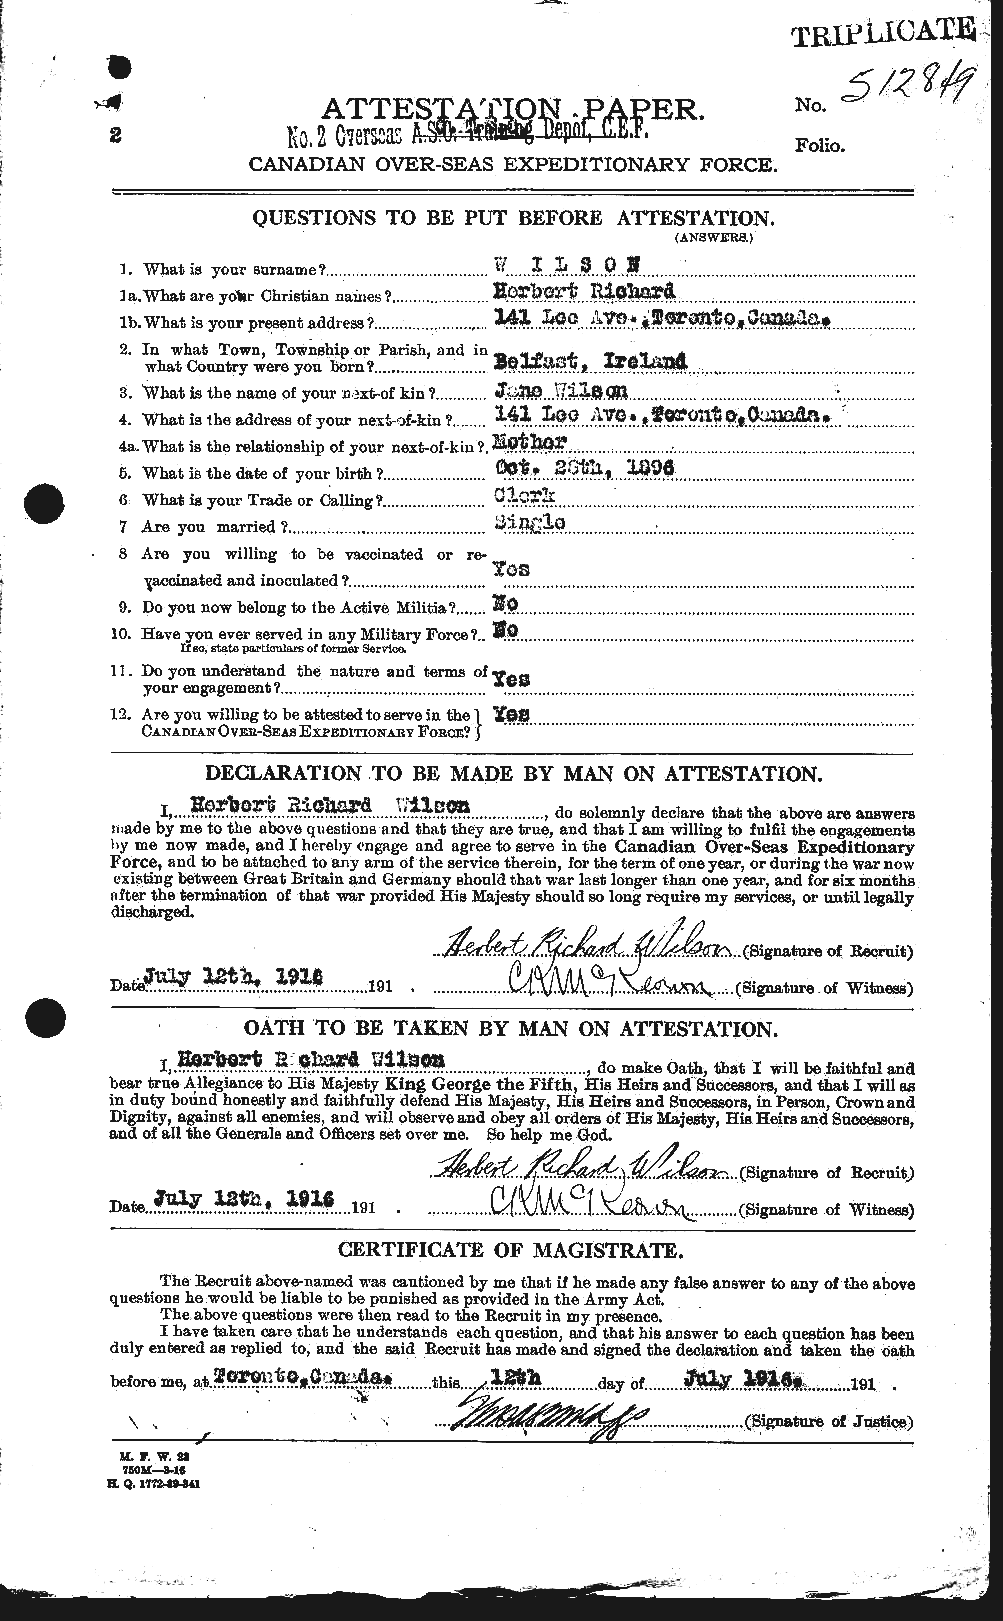 Personnel Records of the First World War - CEF 679574a